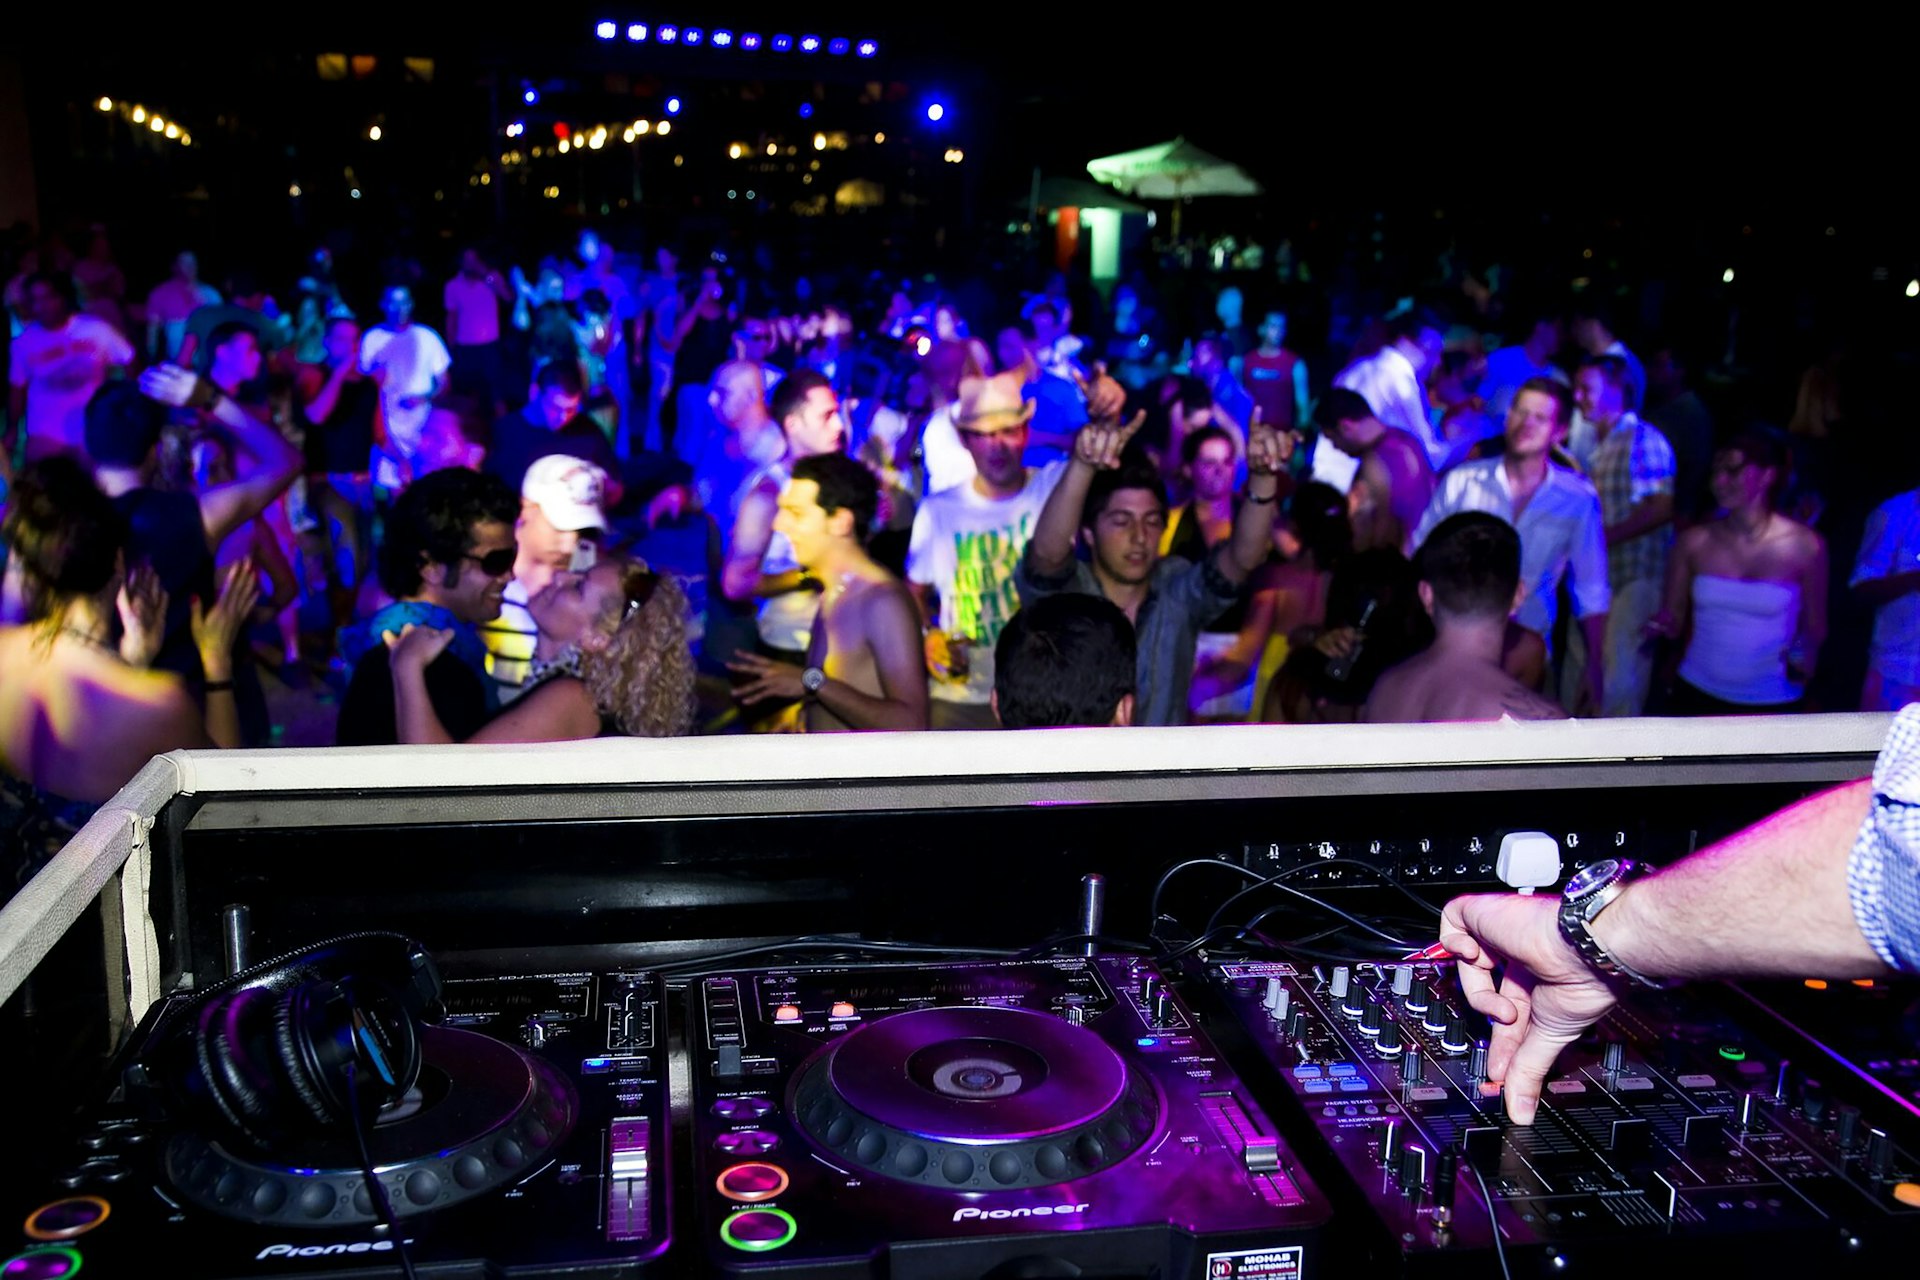 DJ playing music at a club © Diverse Images / UIG / Getty Images